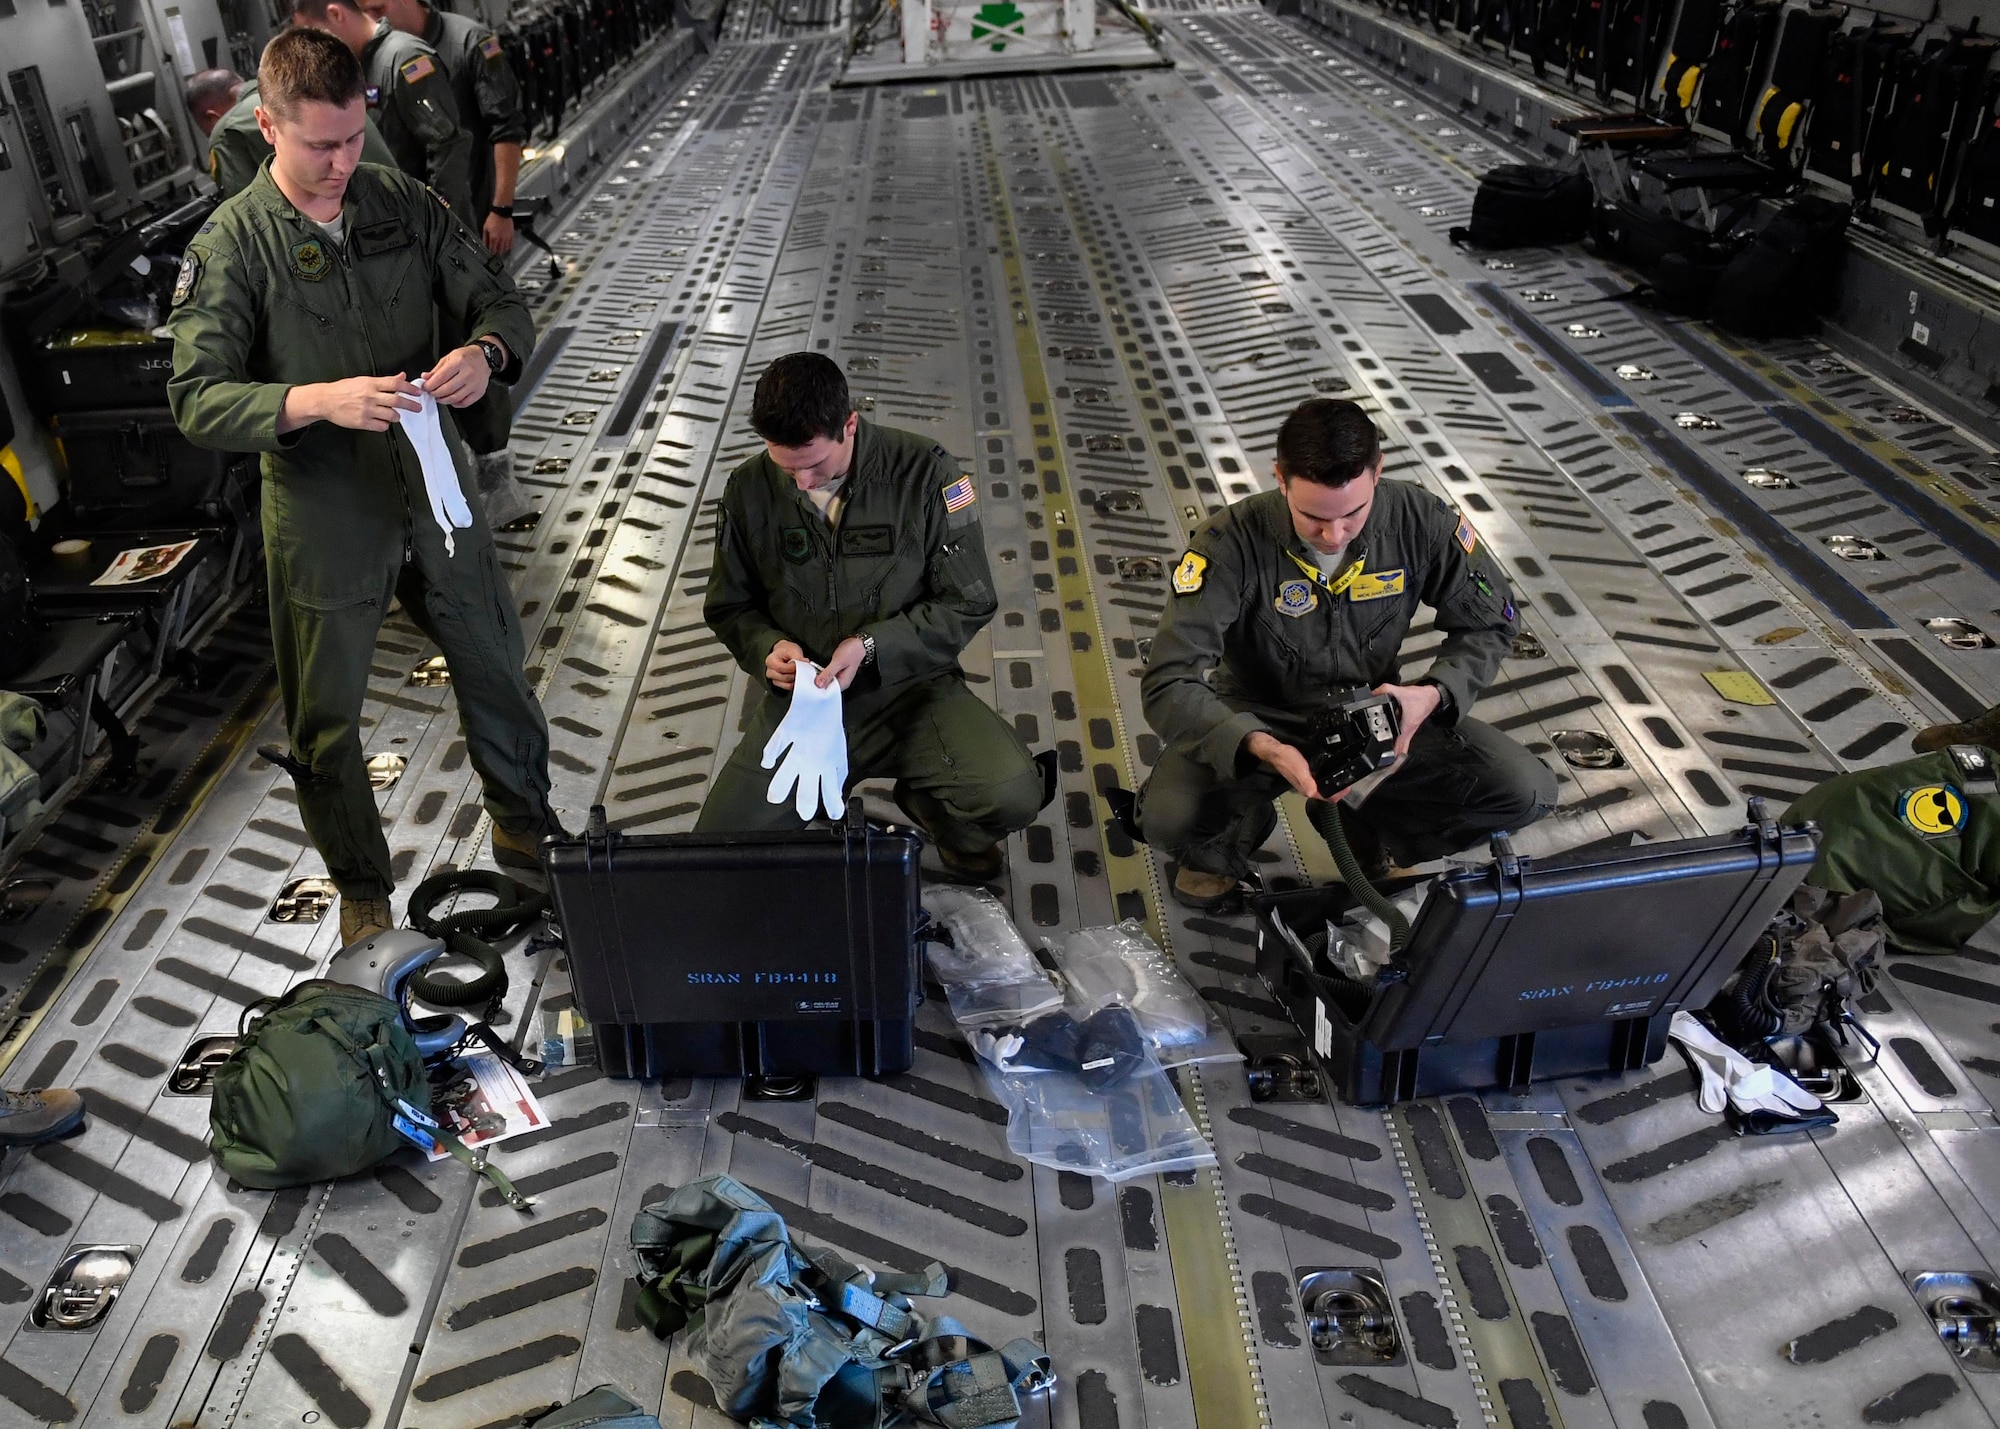 Capt. Bryce Weir, left, 15th Airlift Squadron pilot, Capt. Jason Carroll, center, 15th AS airdrop instructor pilot, and 2nd Lt. Nick Hartsock, 15th Airlift Squadron pilot, open their aircrew eye and respiratory protection system (AERPS) kits before a flight to North Auxiliary Airfield in North, South Carolina, March 15, 2017 to execute in-flight training with (AERPS) equipment. The flight marked the first time in more than 10 years where aircrews wore AERPS equipment. AERPS equipment consists of a rubber mask, multiple layers of boots and gloves, fan filter system and an audio and speaker system.